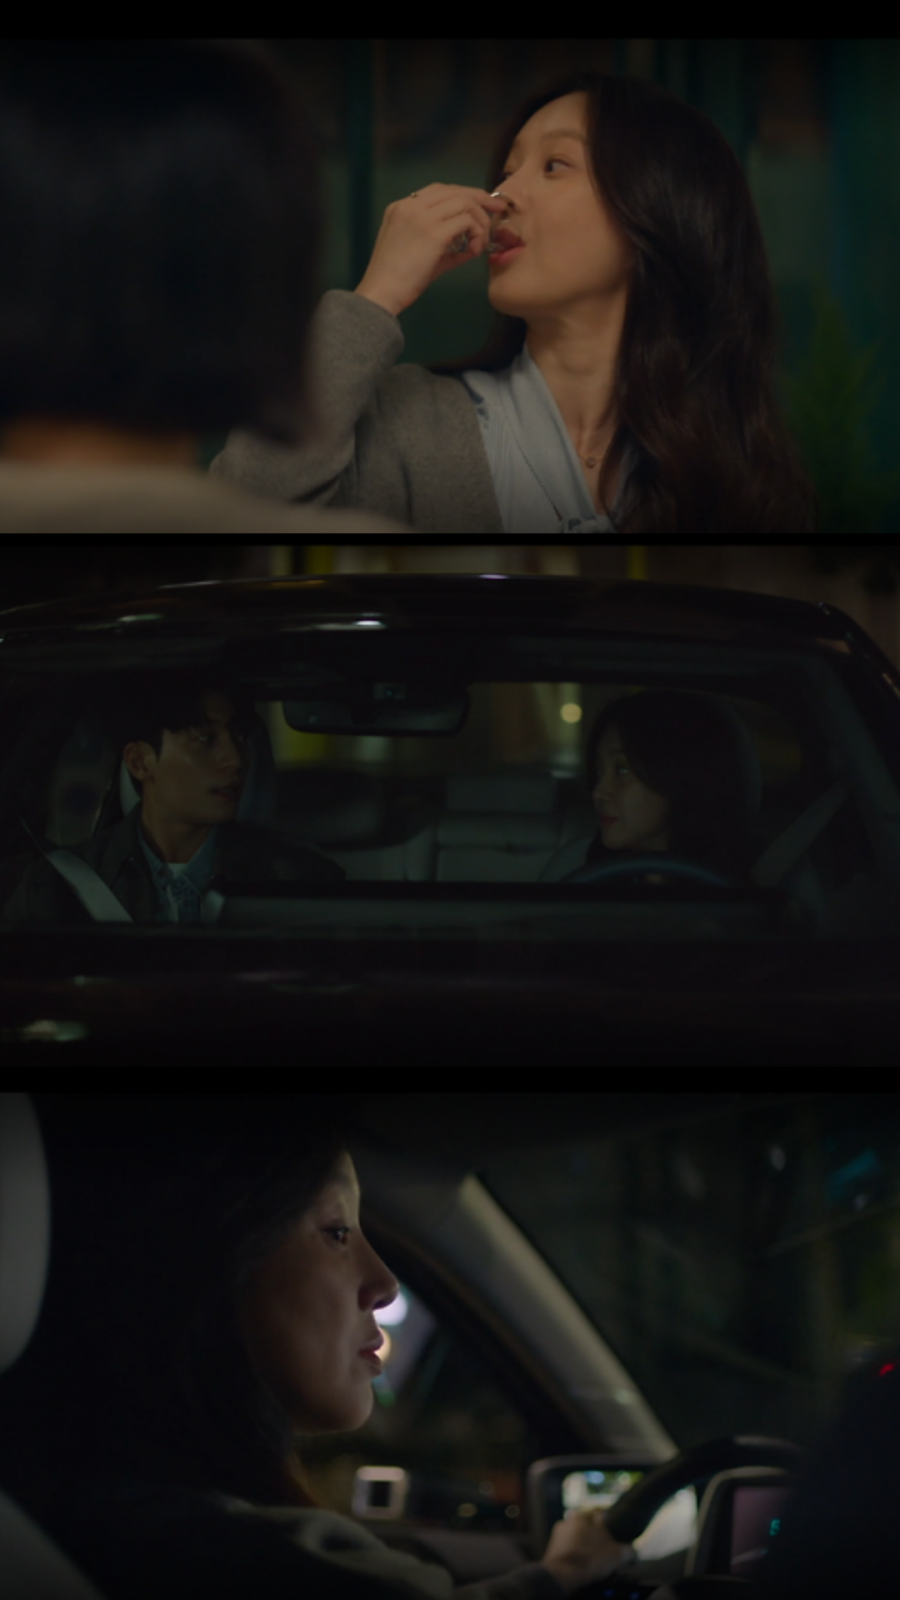 “The Midnight Romance in Hagwon” Issues Apology after Viewers Point Out the DUI Scene